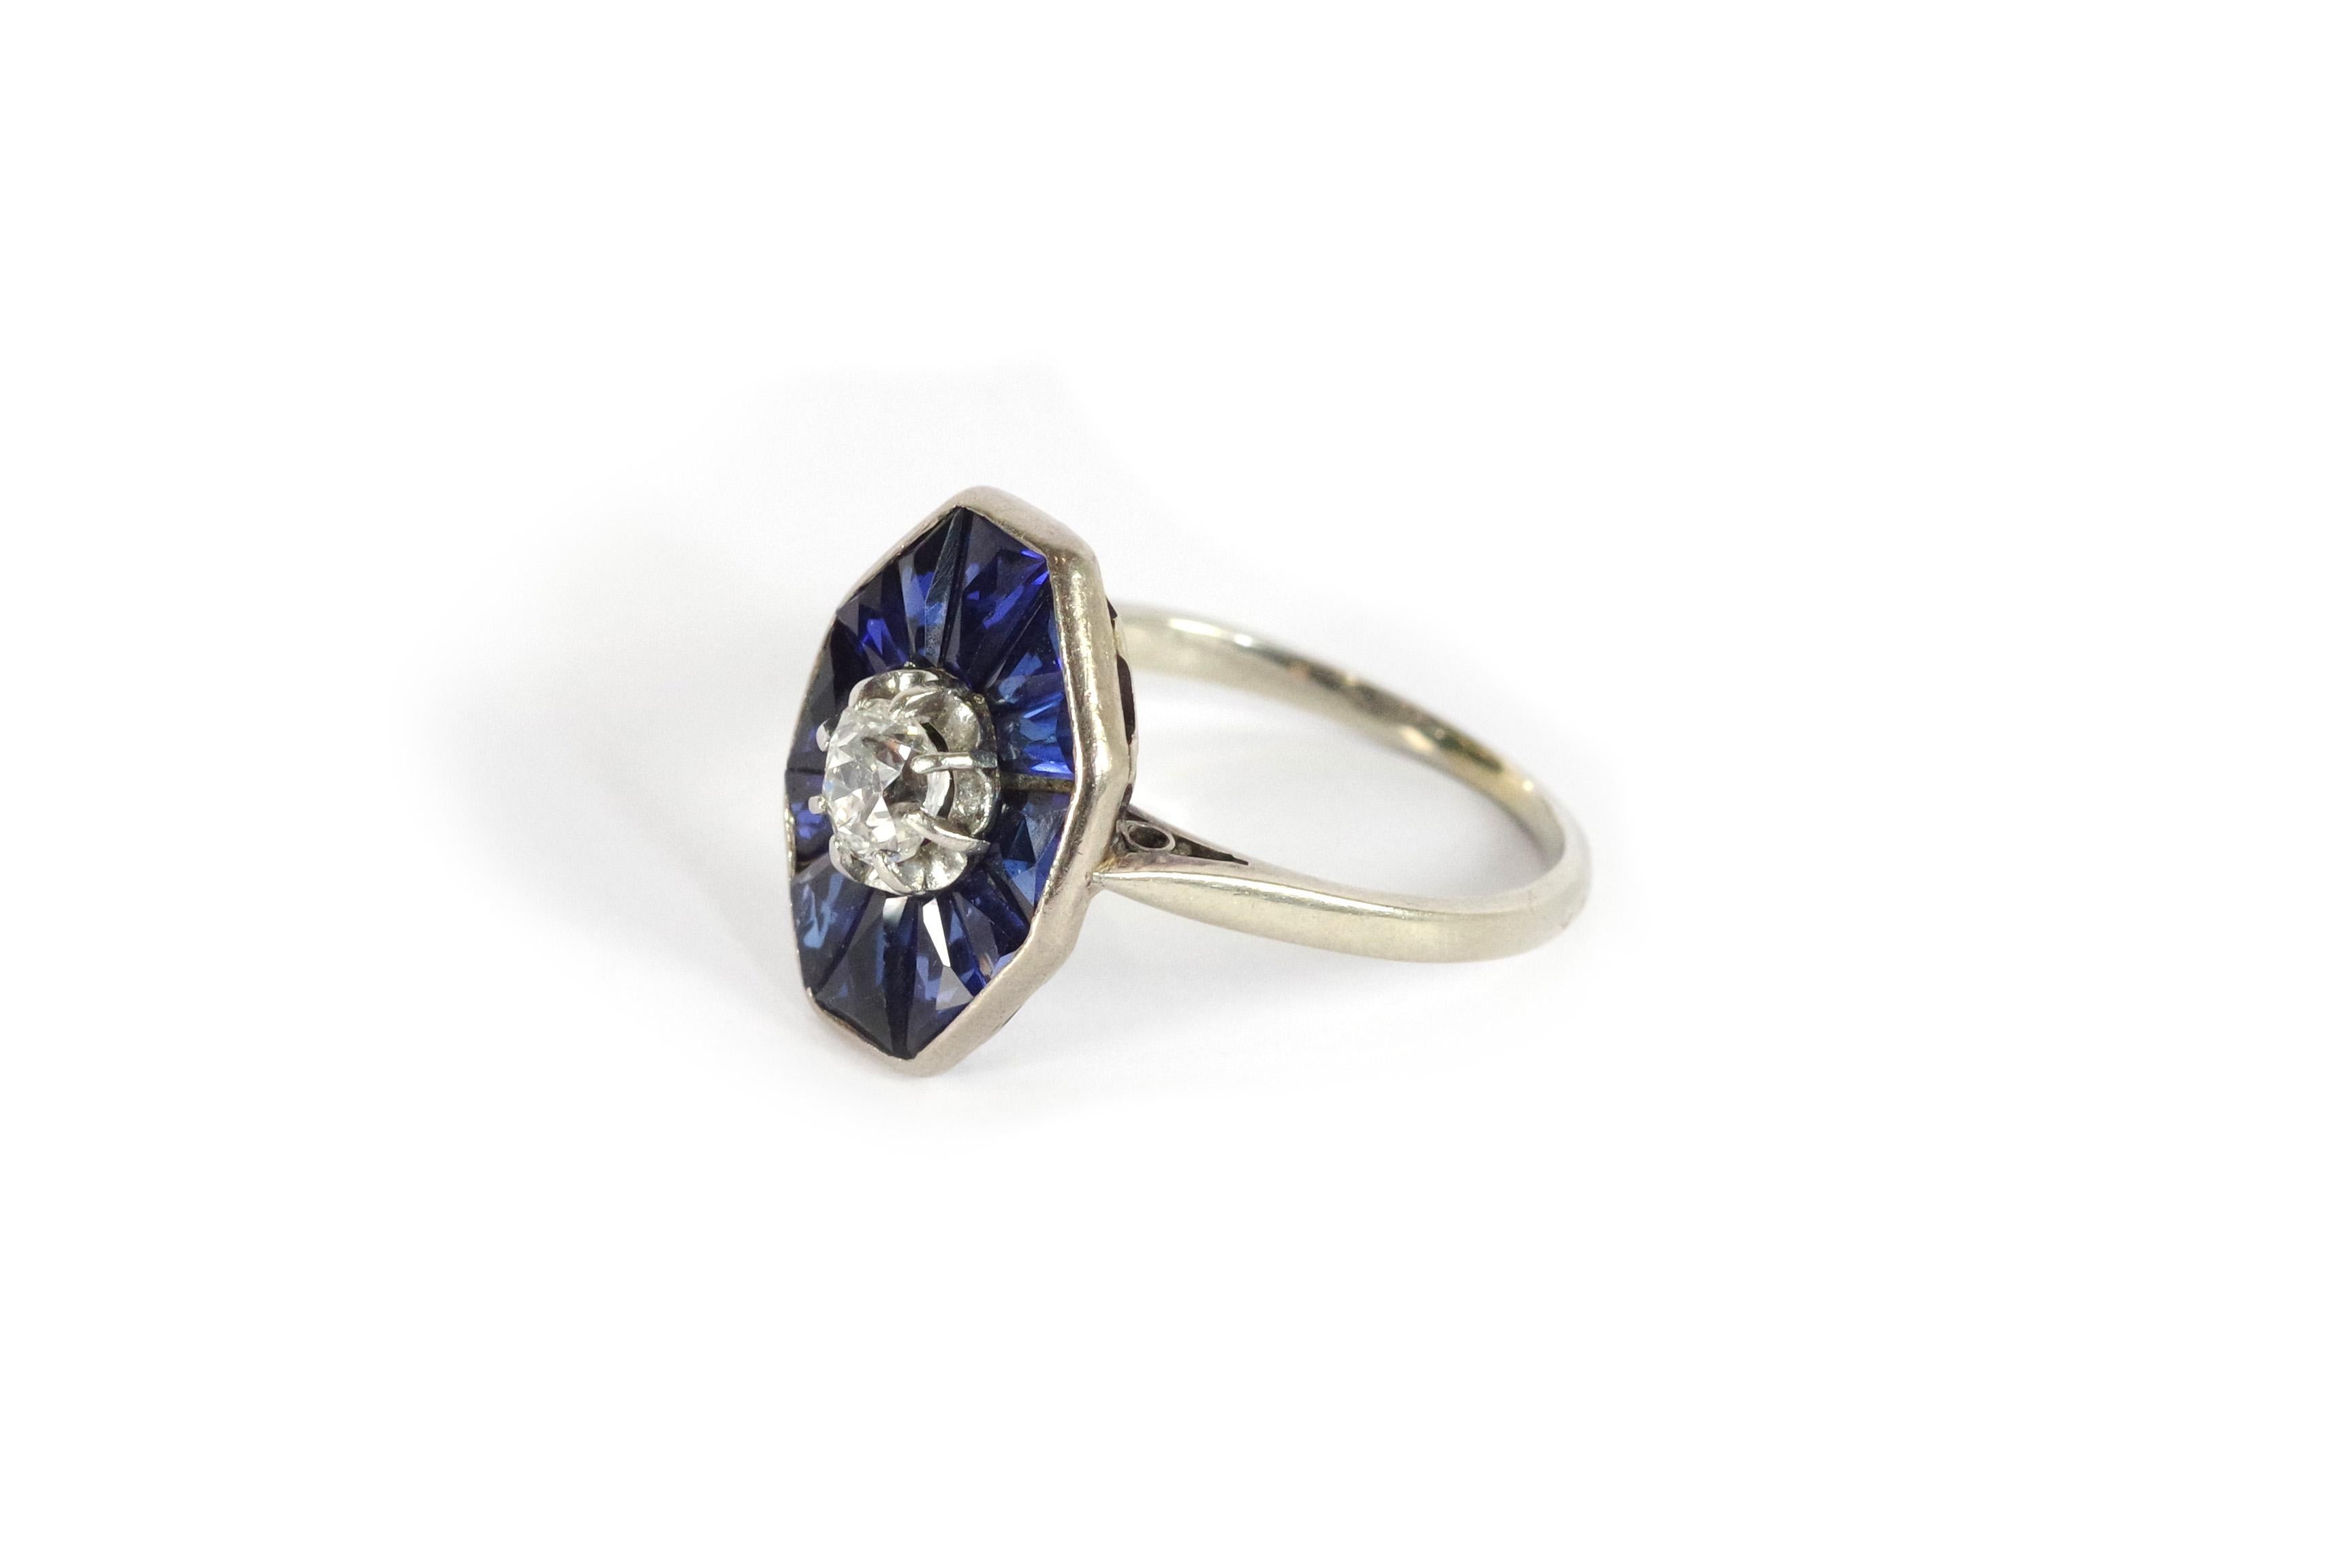 Art Deco sapphire platinum ring in 18 karat white gold and platinum. Octagonal Art Deco ring with an old mine cut diamond, approx. 0.20 carat. The diamond is surrounded by triangular faceted synthetic sapphires. The ring features the geometric